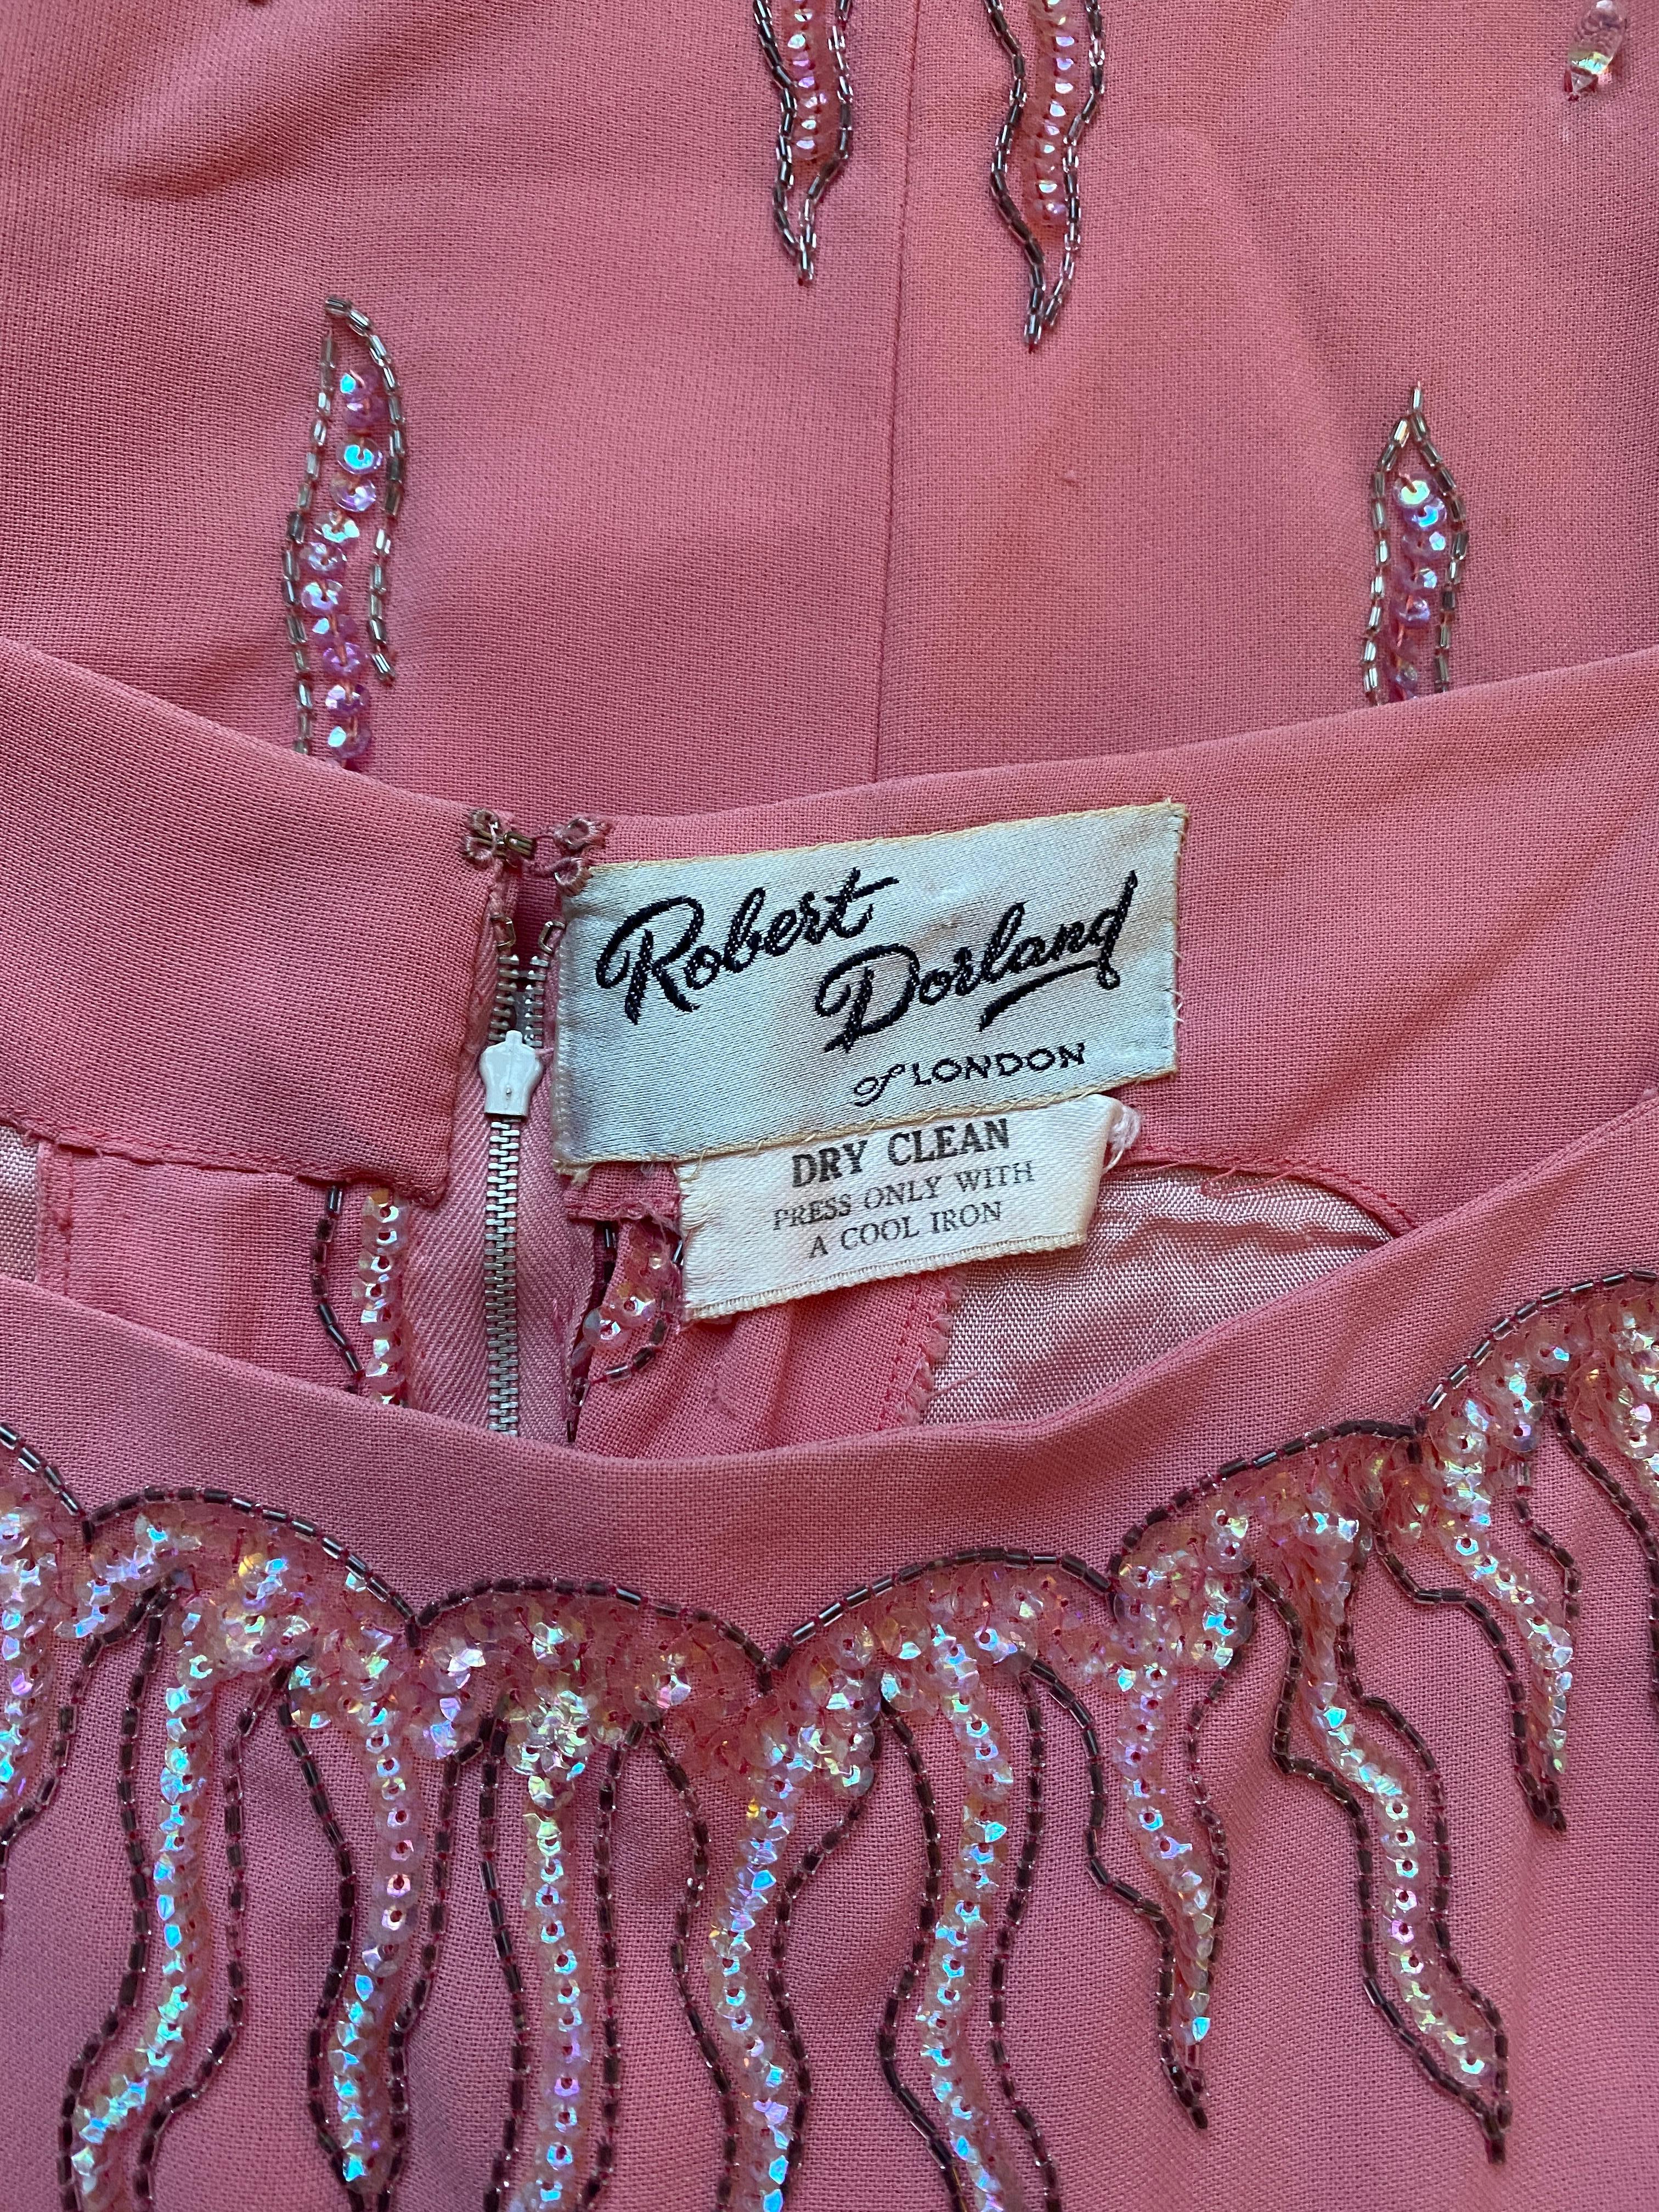 1960s Robert Dorland Pink Sequin and Beaded Mini Dress For Sale 1